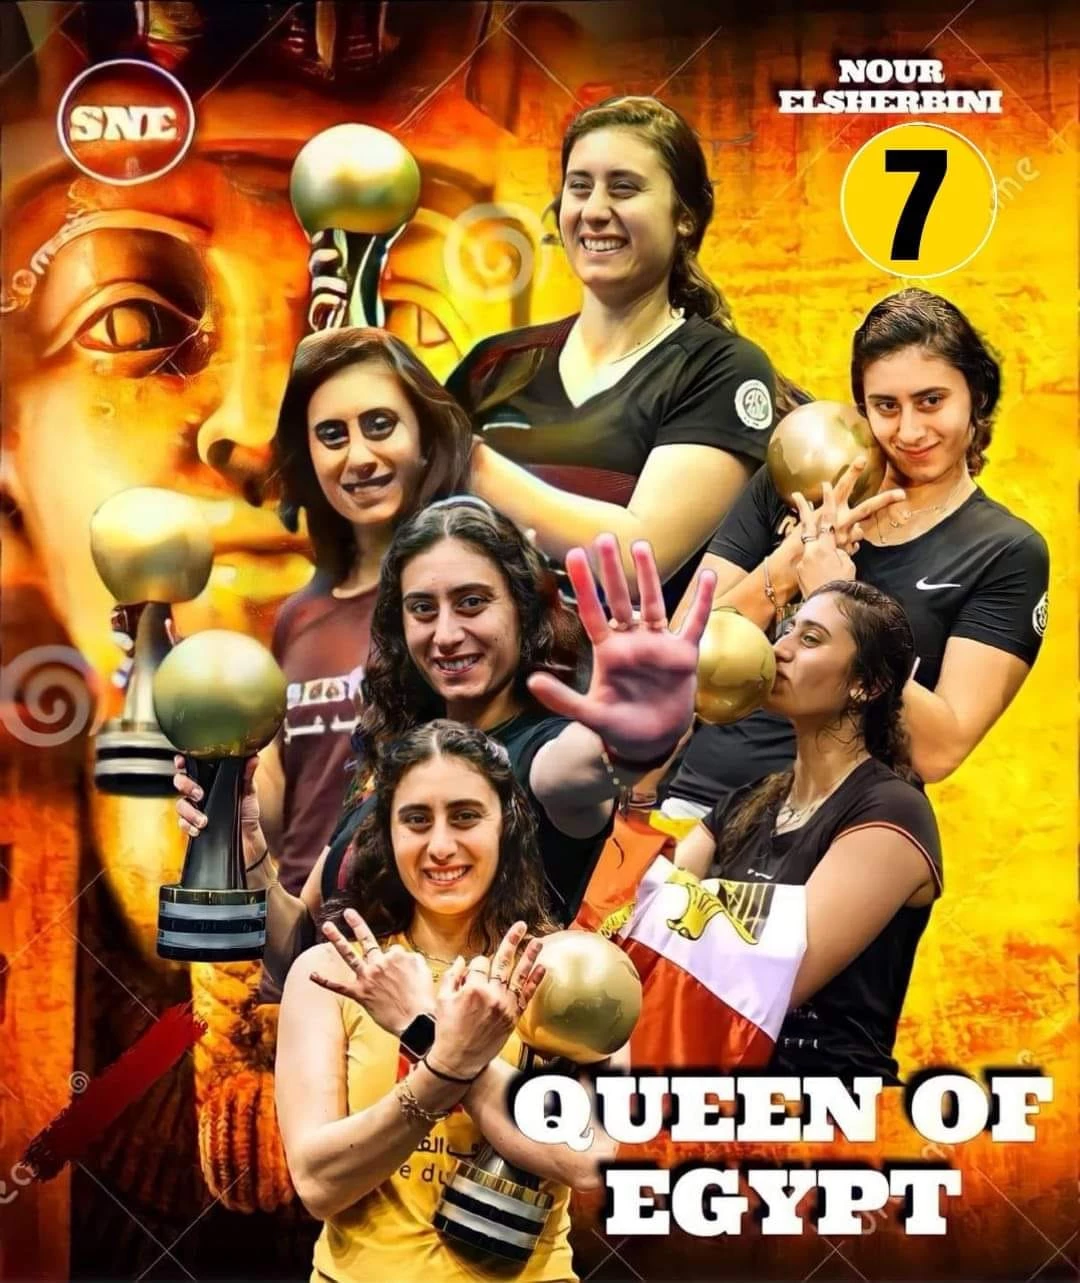 Queen Nour El Sherbini separates her from the miracle by one step Nour El Sherbini, 7-time world champion, retains her title and sits on the throne of World Squash throughout history